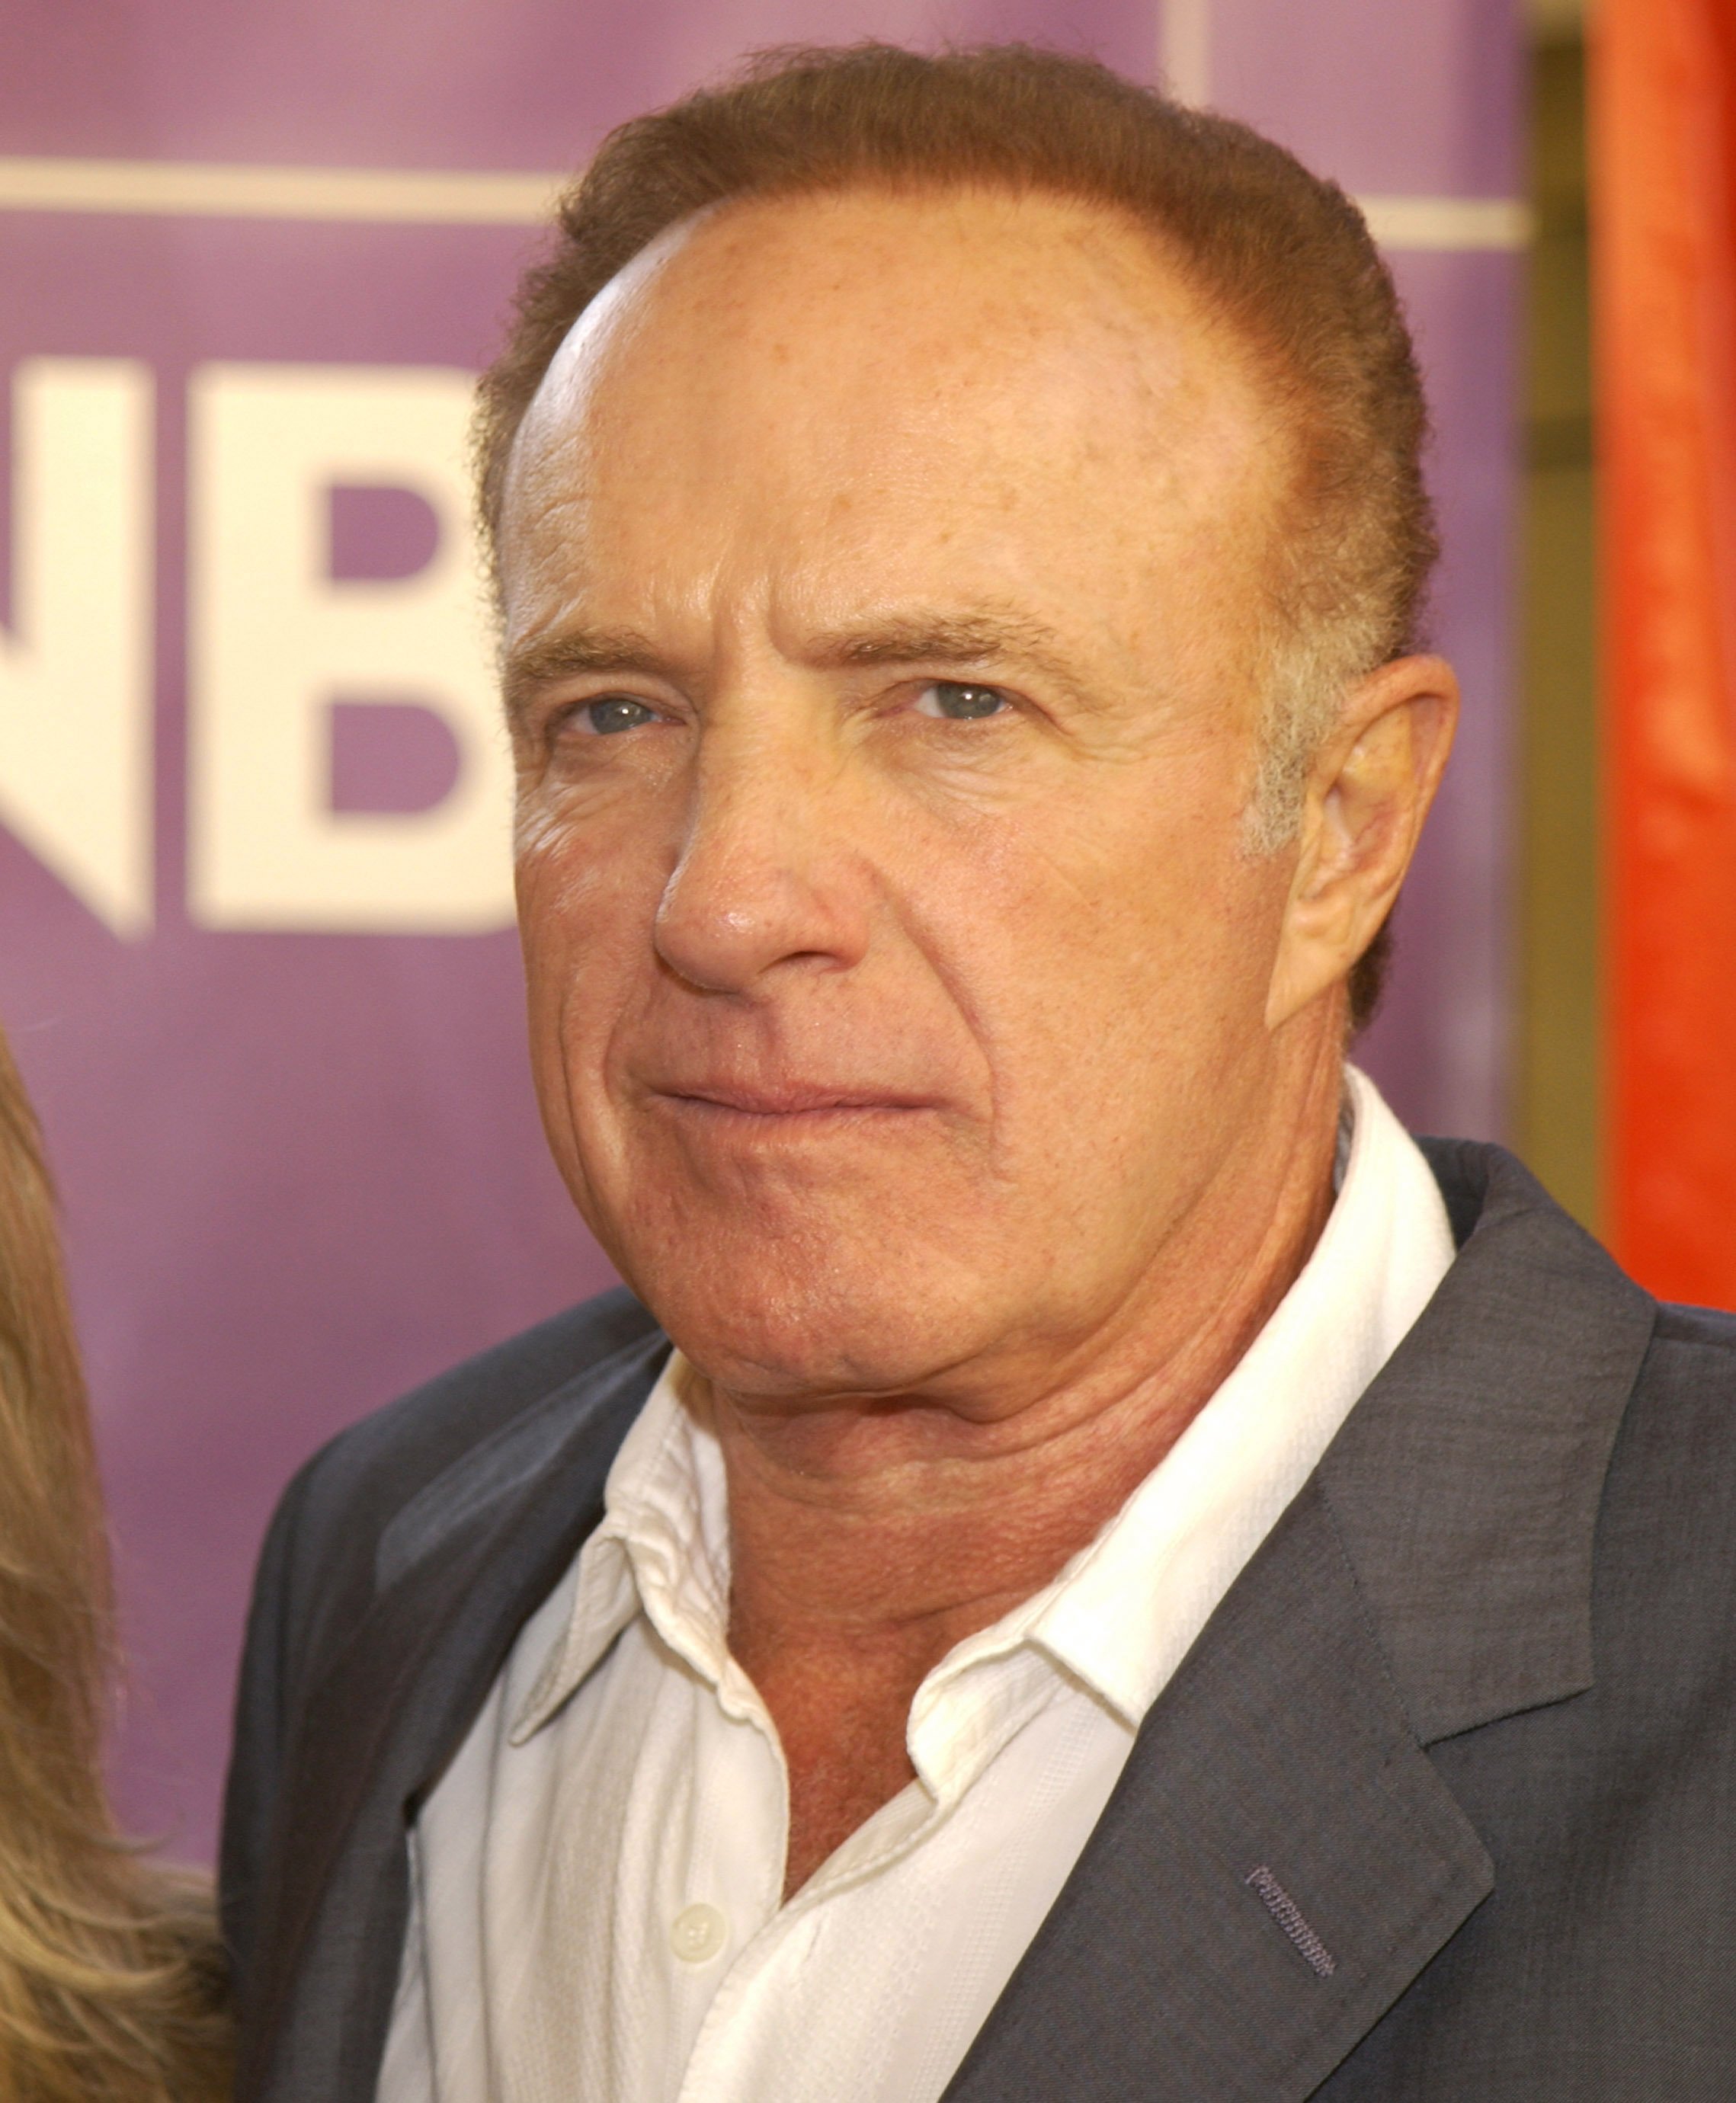 James Caan during the NBC All-Star Casino Night in Hollywood, California, on July 25, 2003. | Source: Getty Images